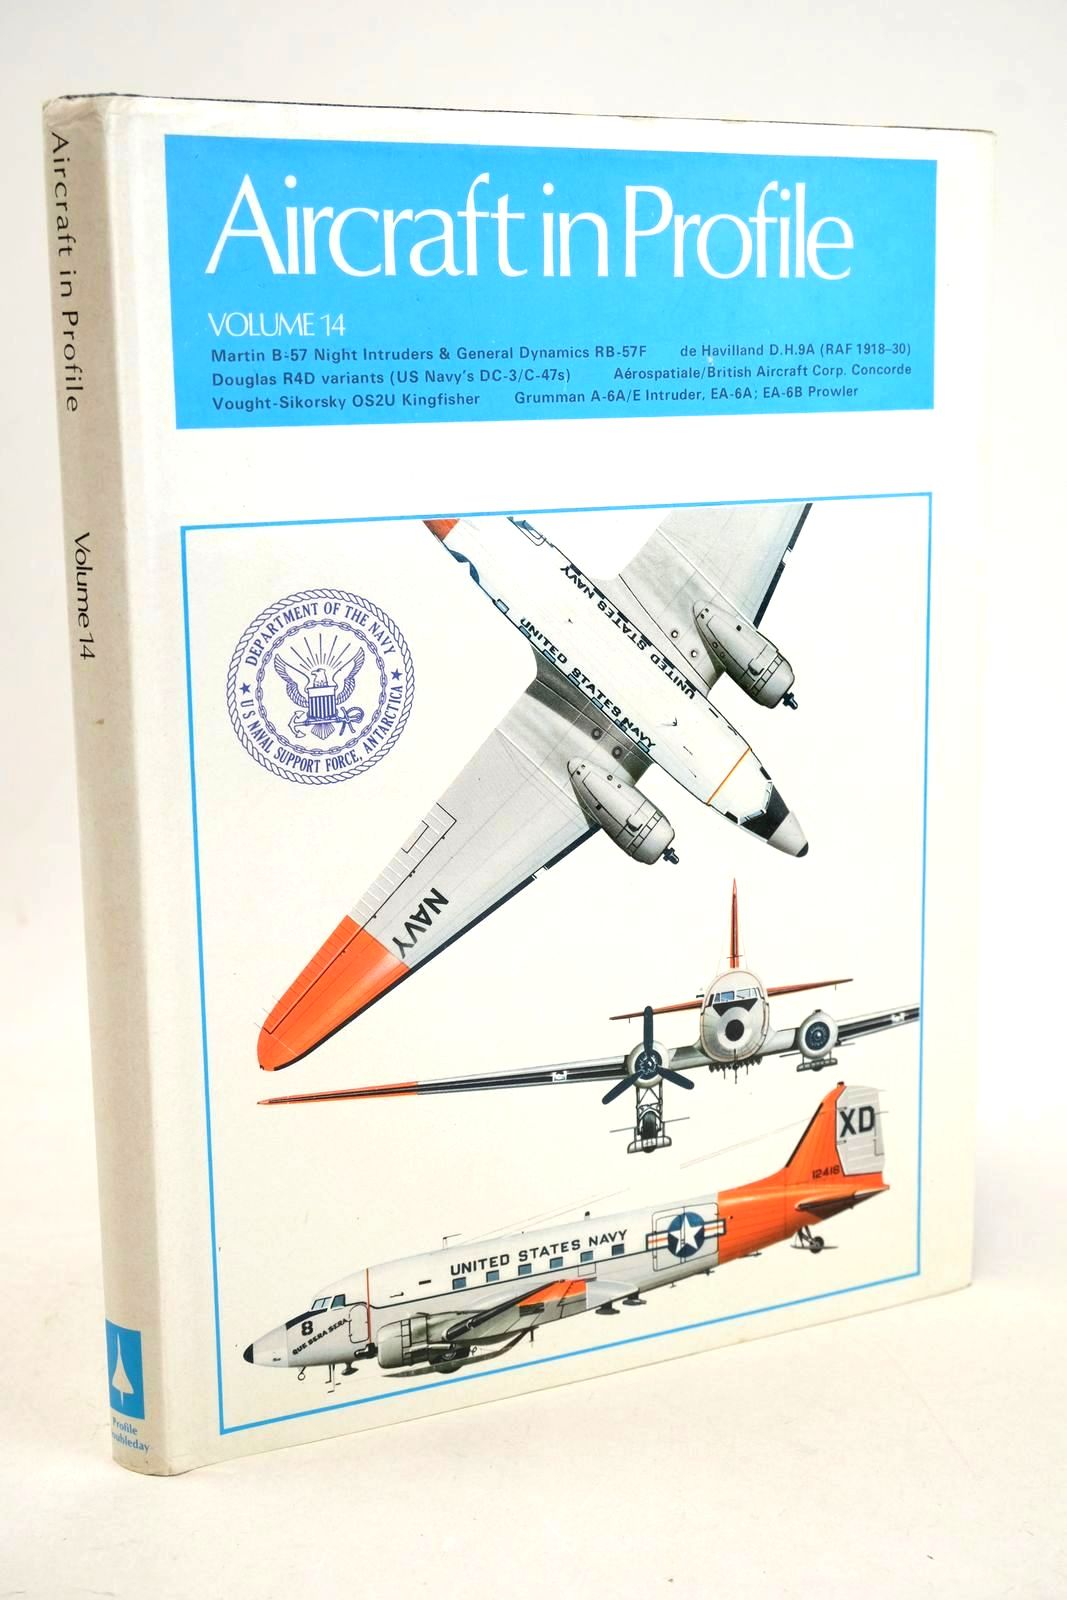 Photo of AIRCRAFT IN PROFILE VOLUME 14 written by Cain, Charles W. published by Profile Publications (STOCK CODE: 1327970)  for sale by Stella & Rose's Books